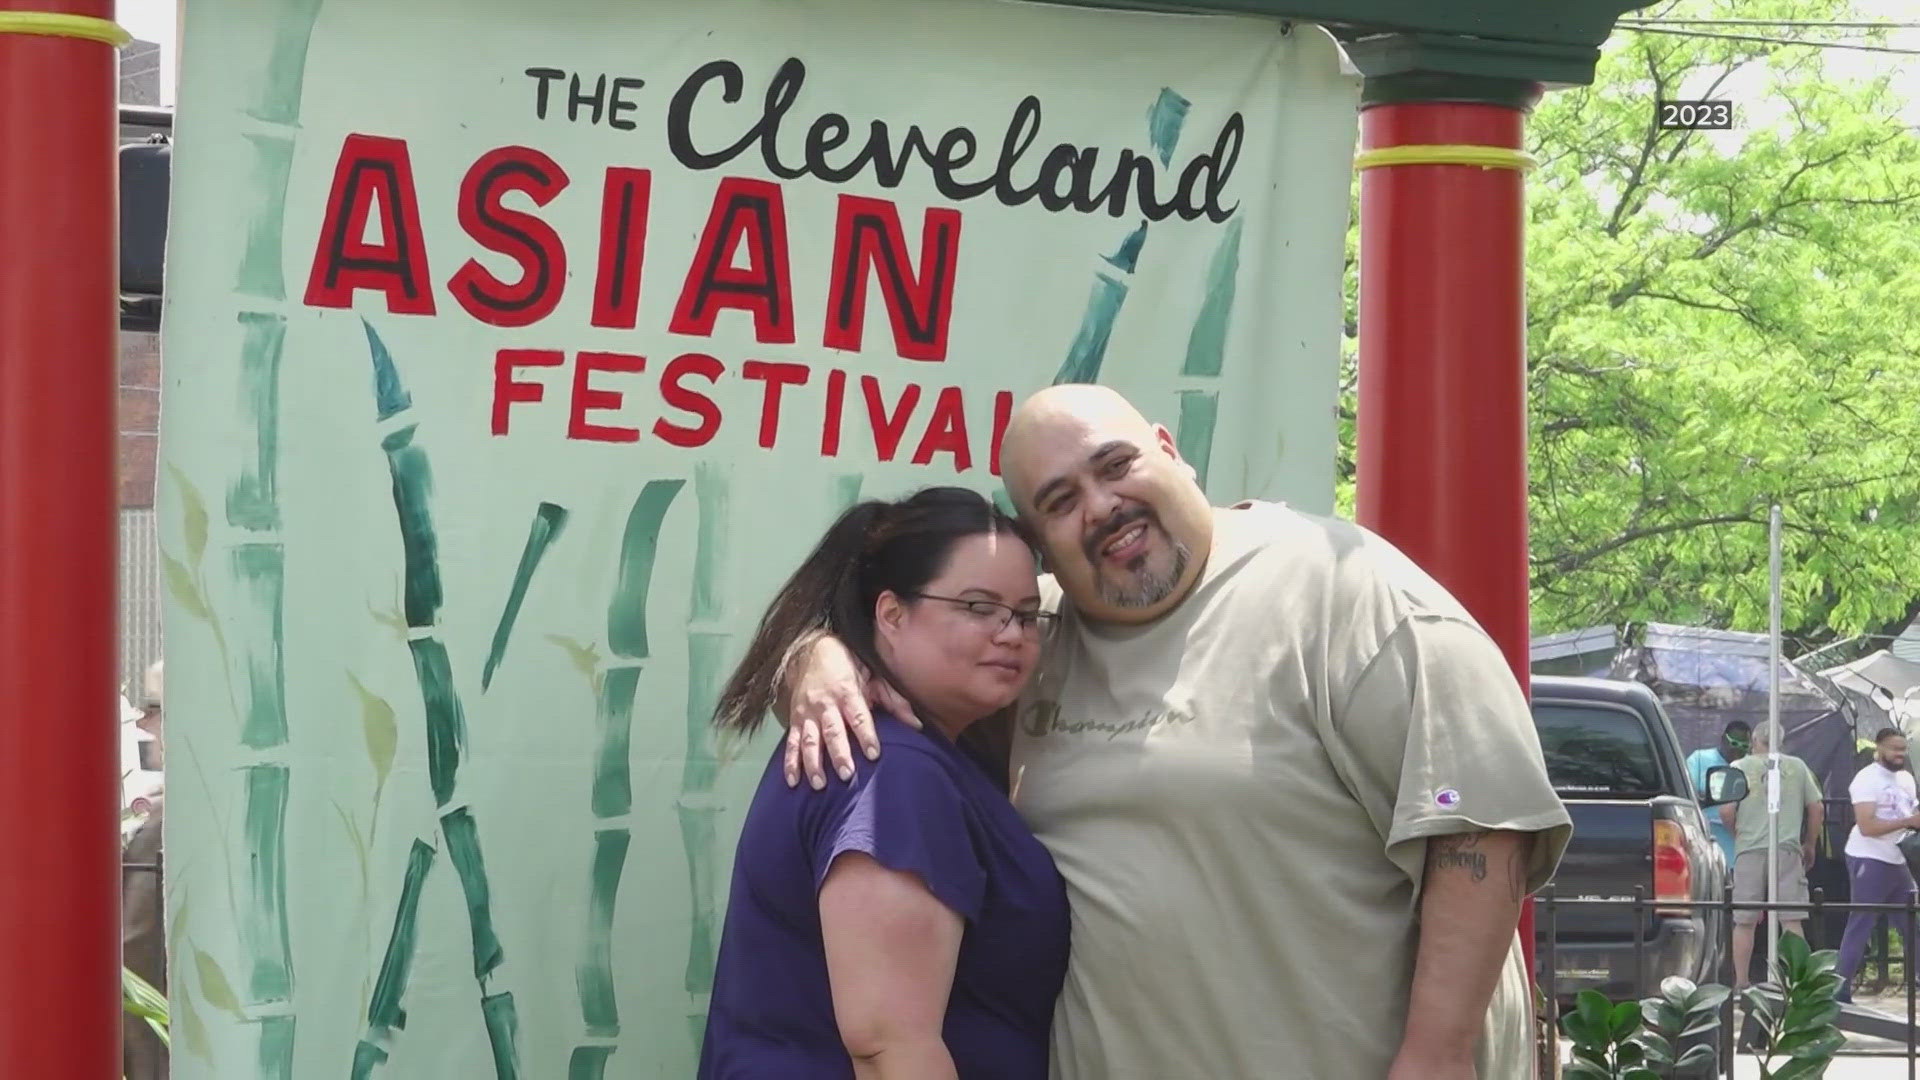 Hosted in Cleveland’s AsiaTown neighborhood, the annual festival showcases Asian cultural performances and businesses.